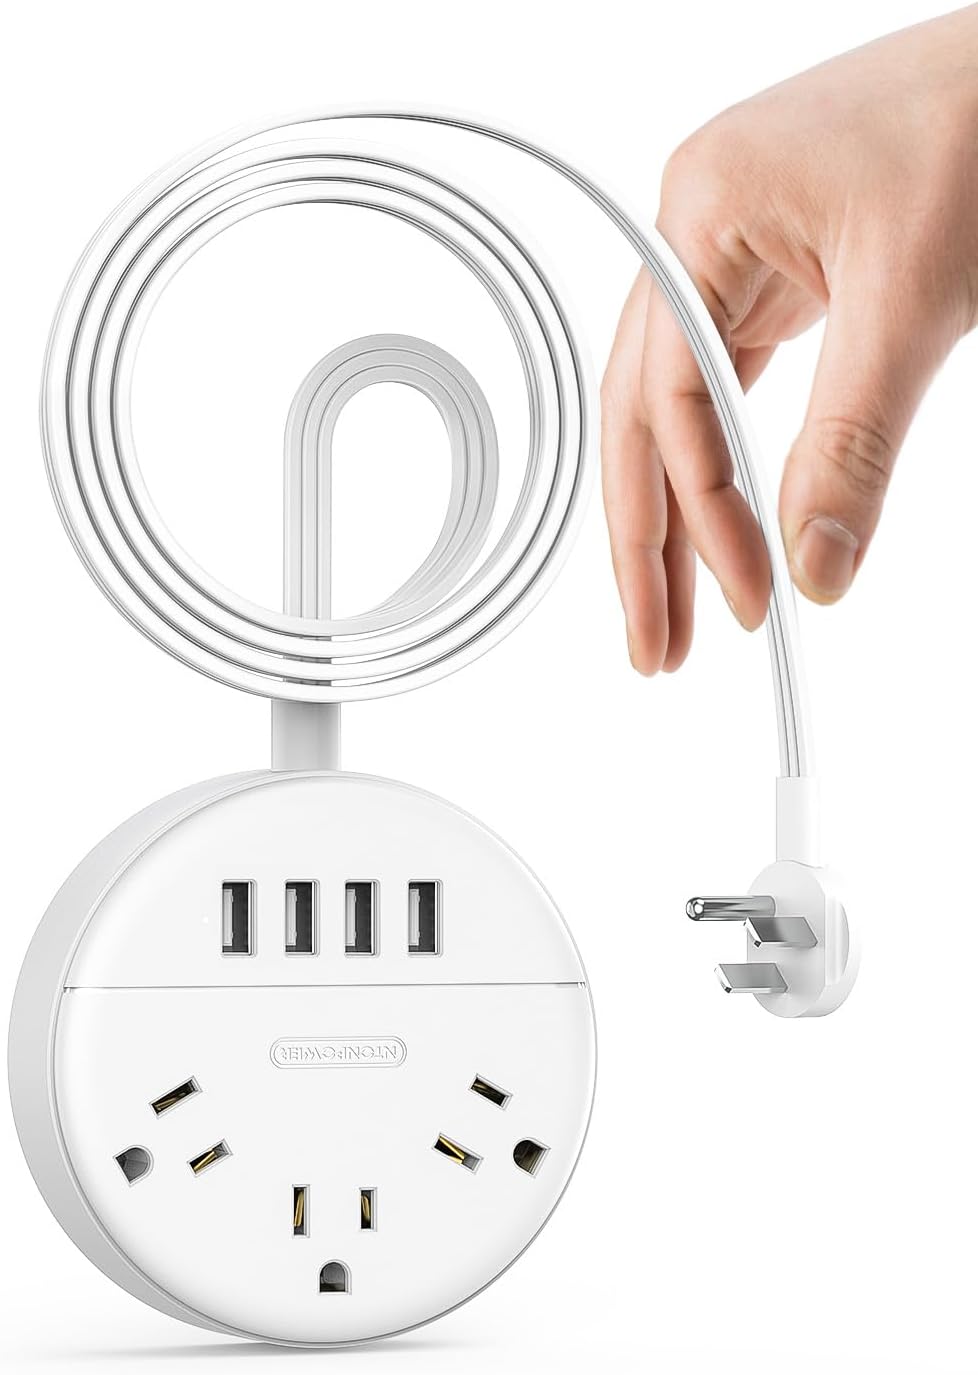 Ntonpower New Dot Power Strip 3 Outlets 4 USB Ports Flat Cord